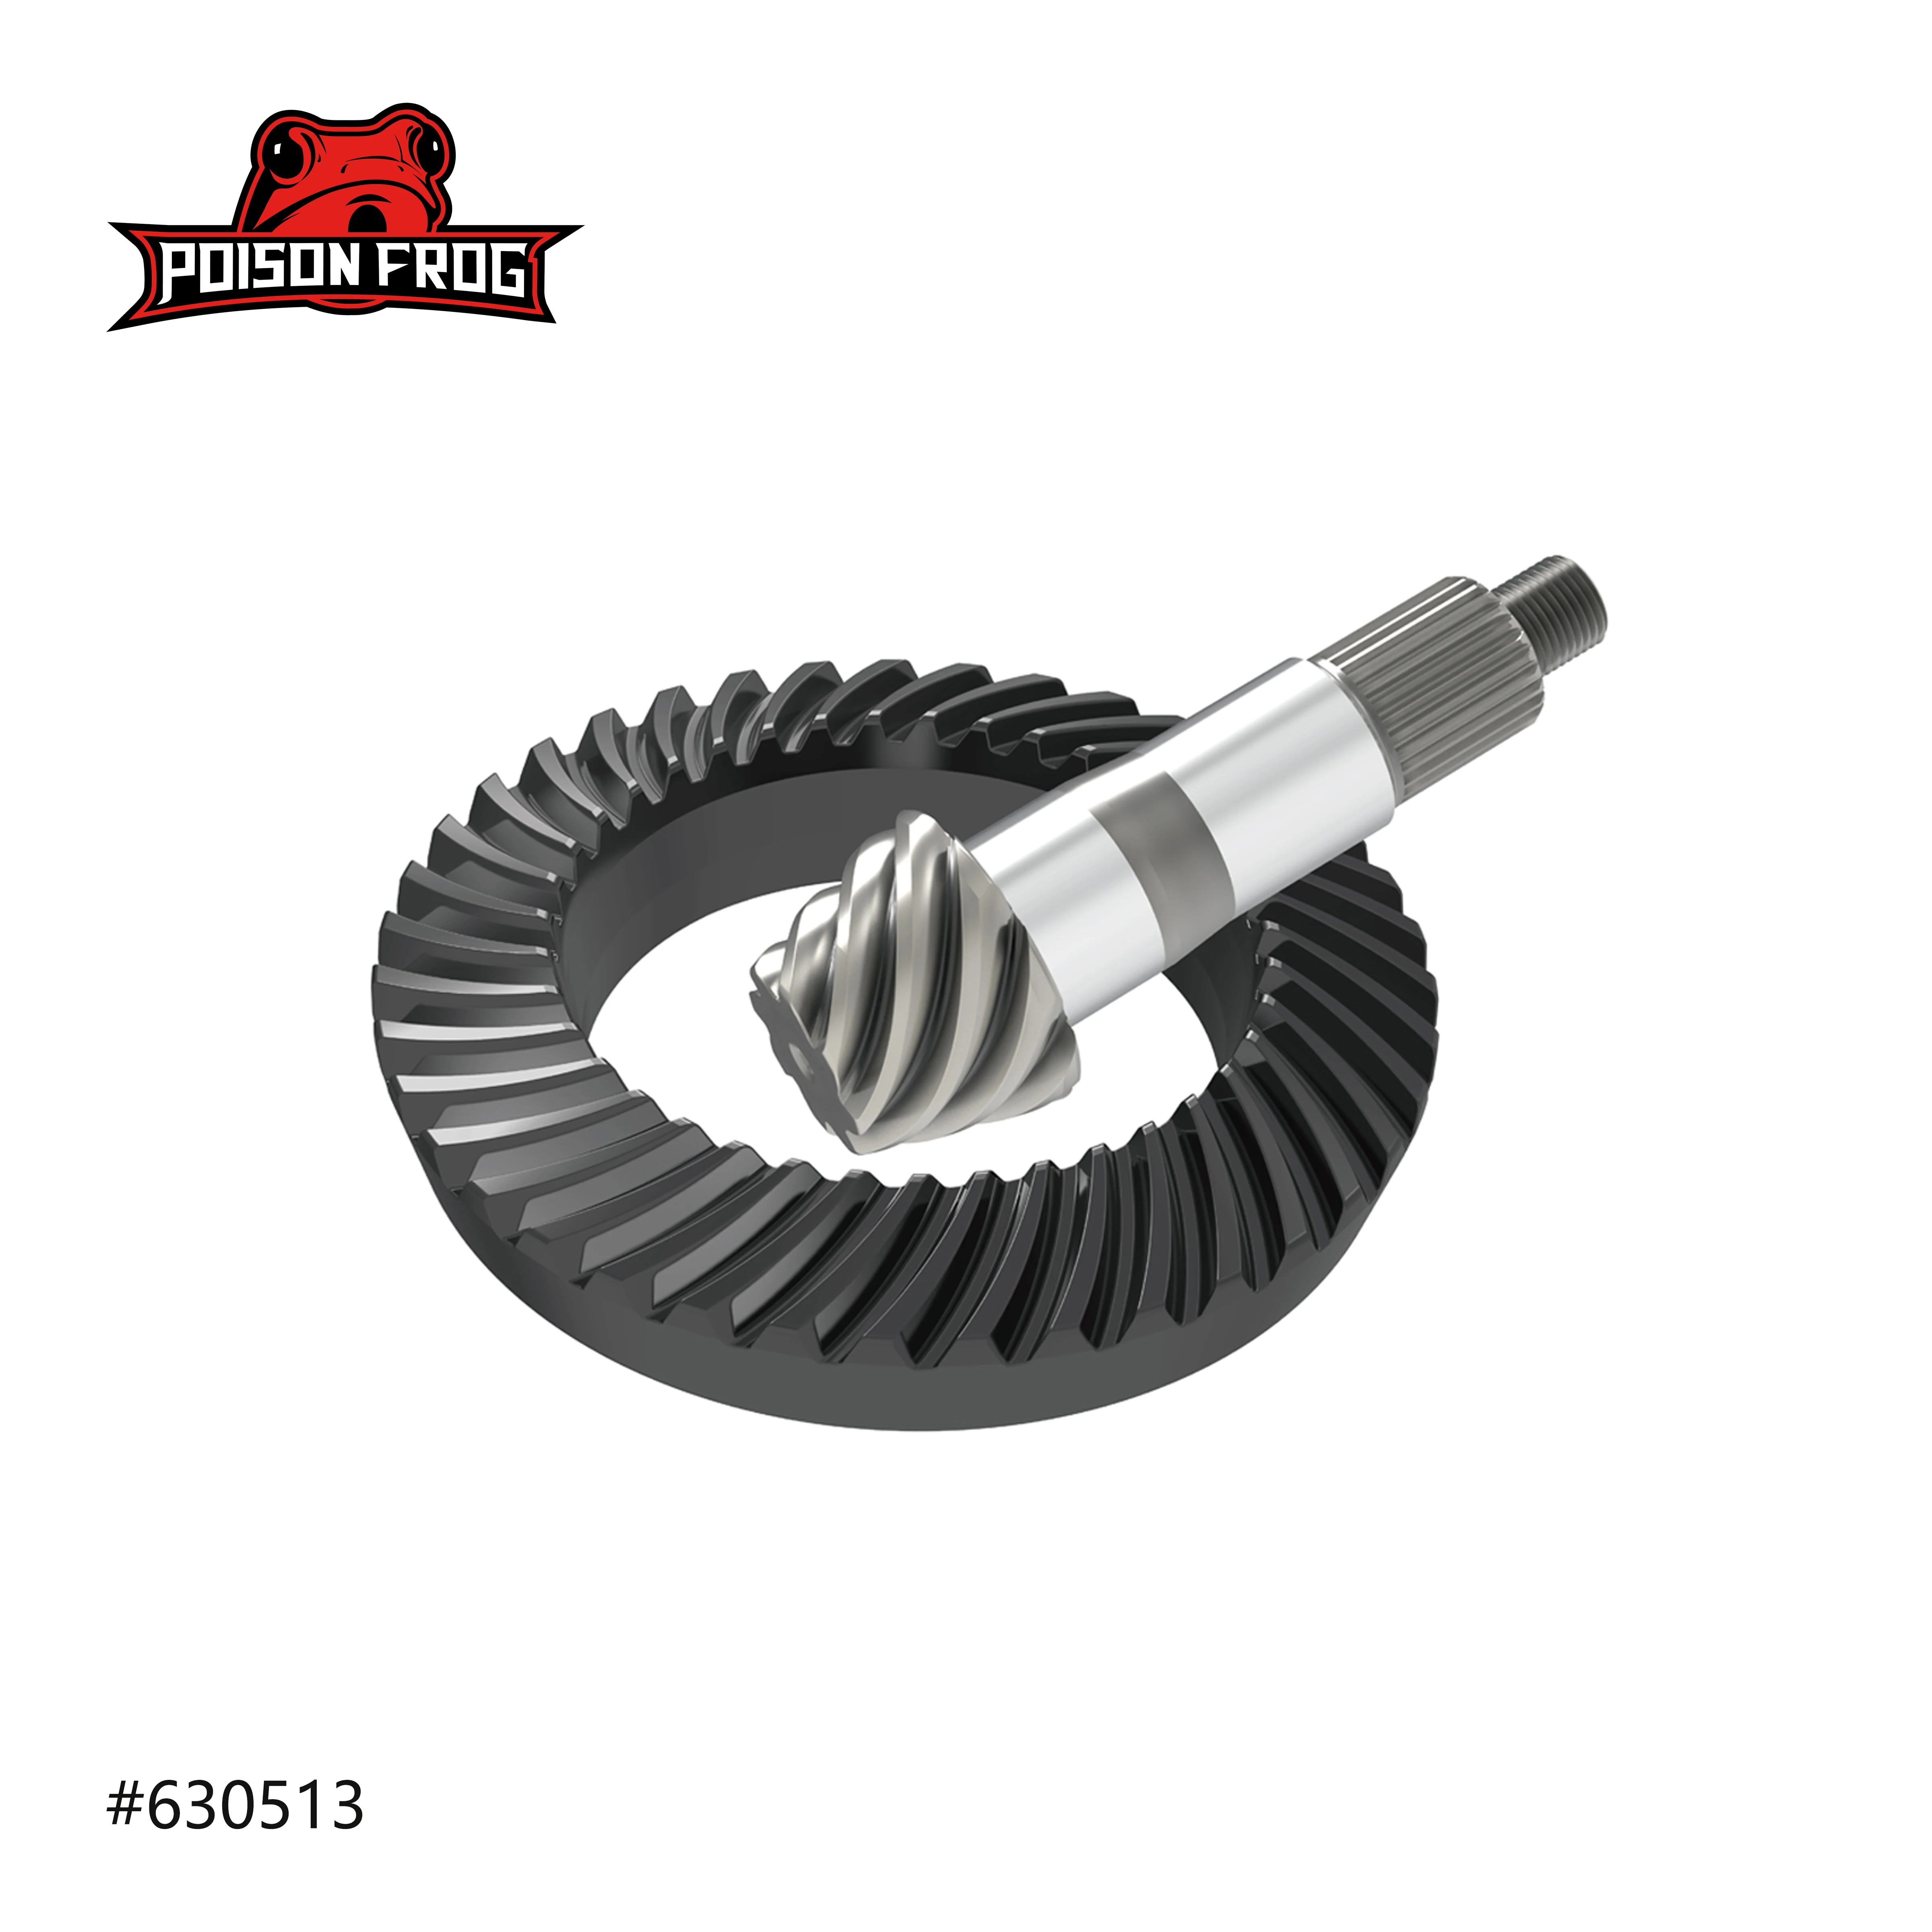 Poison Frog 630513 Dana 30 Front Ring & Pinions  Oe Gear Ratio For Jeep  Wrangler Jl - Buy Speed Ratio ,Gear Ratio,Ring Pinion Product on  